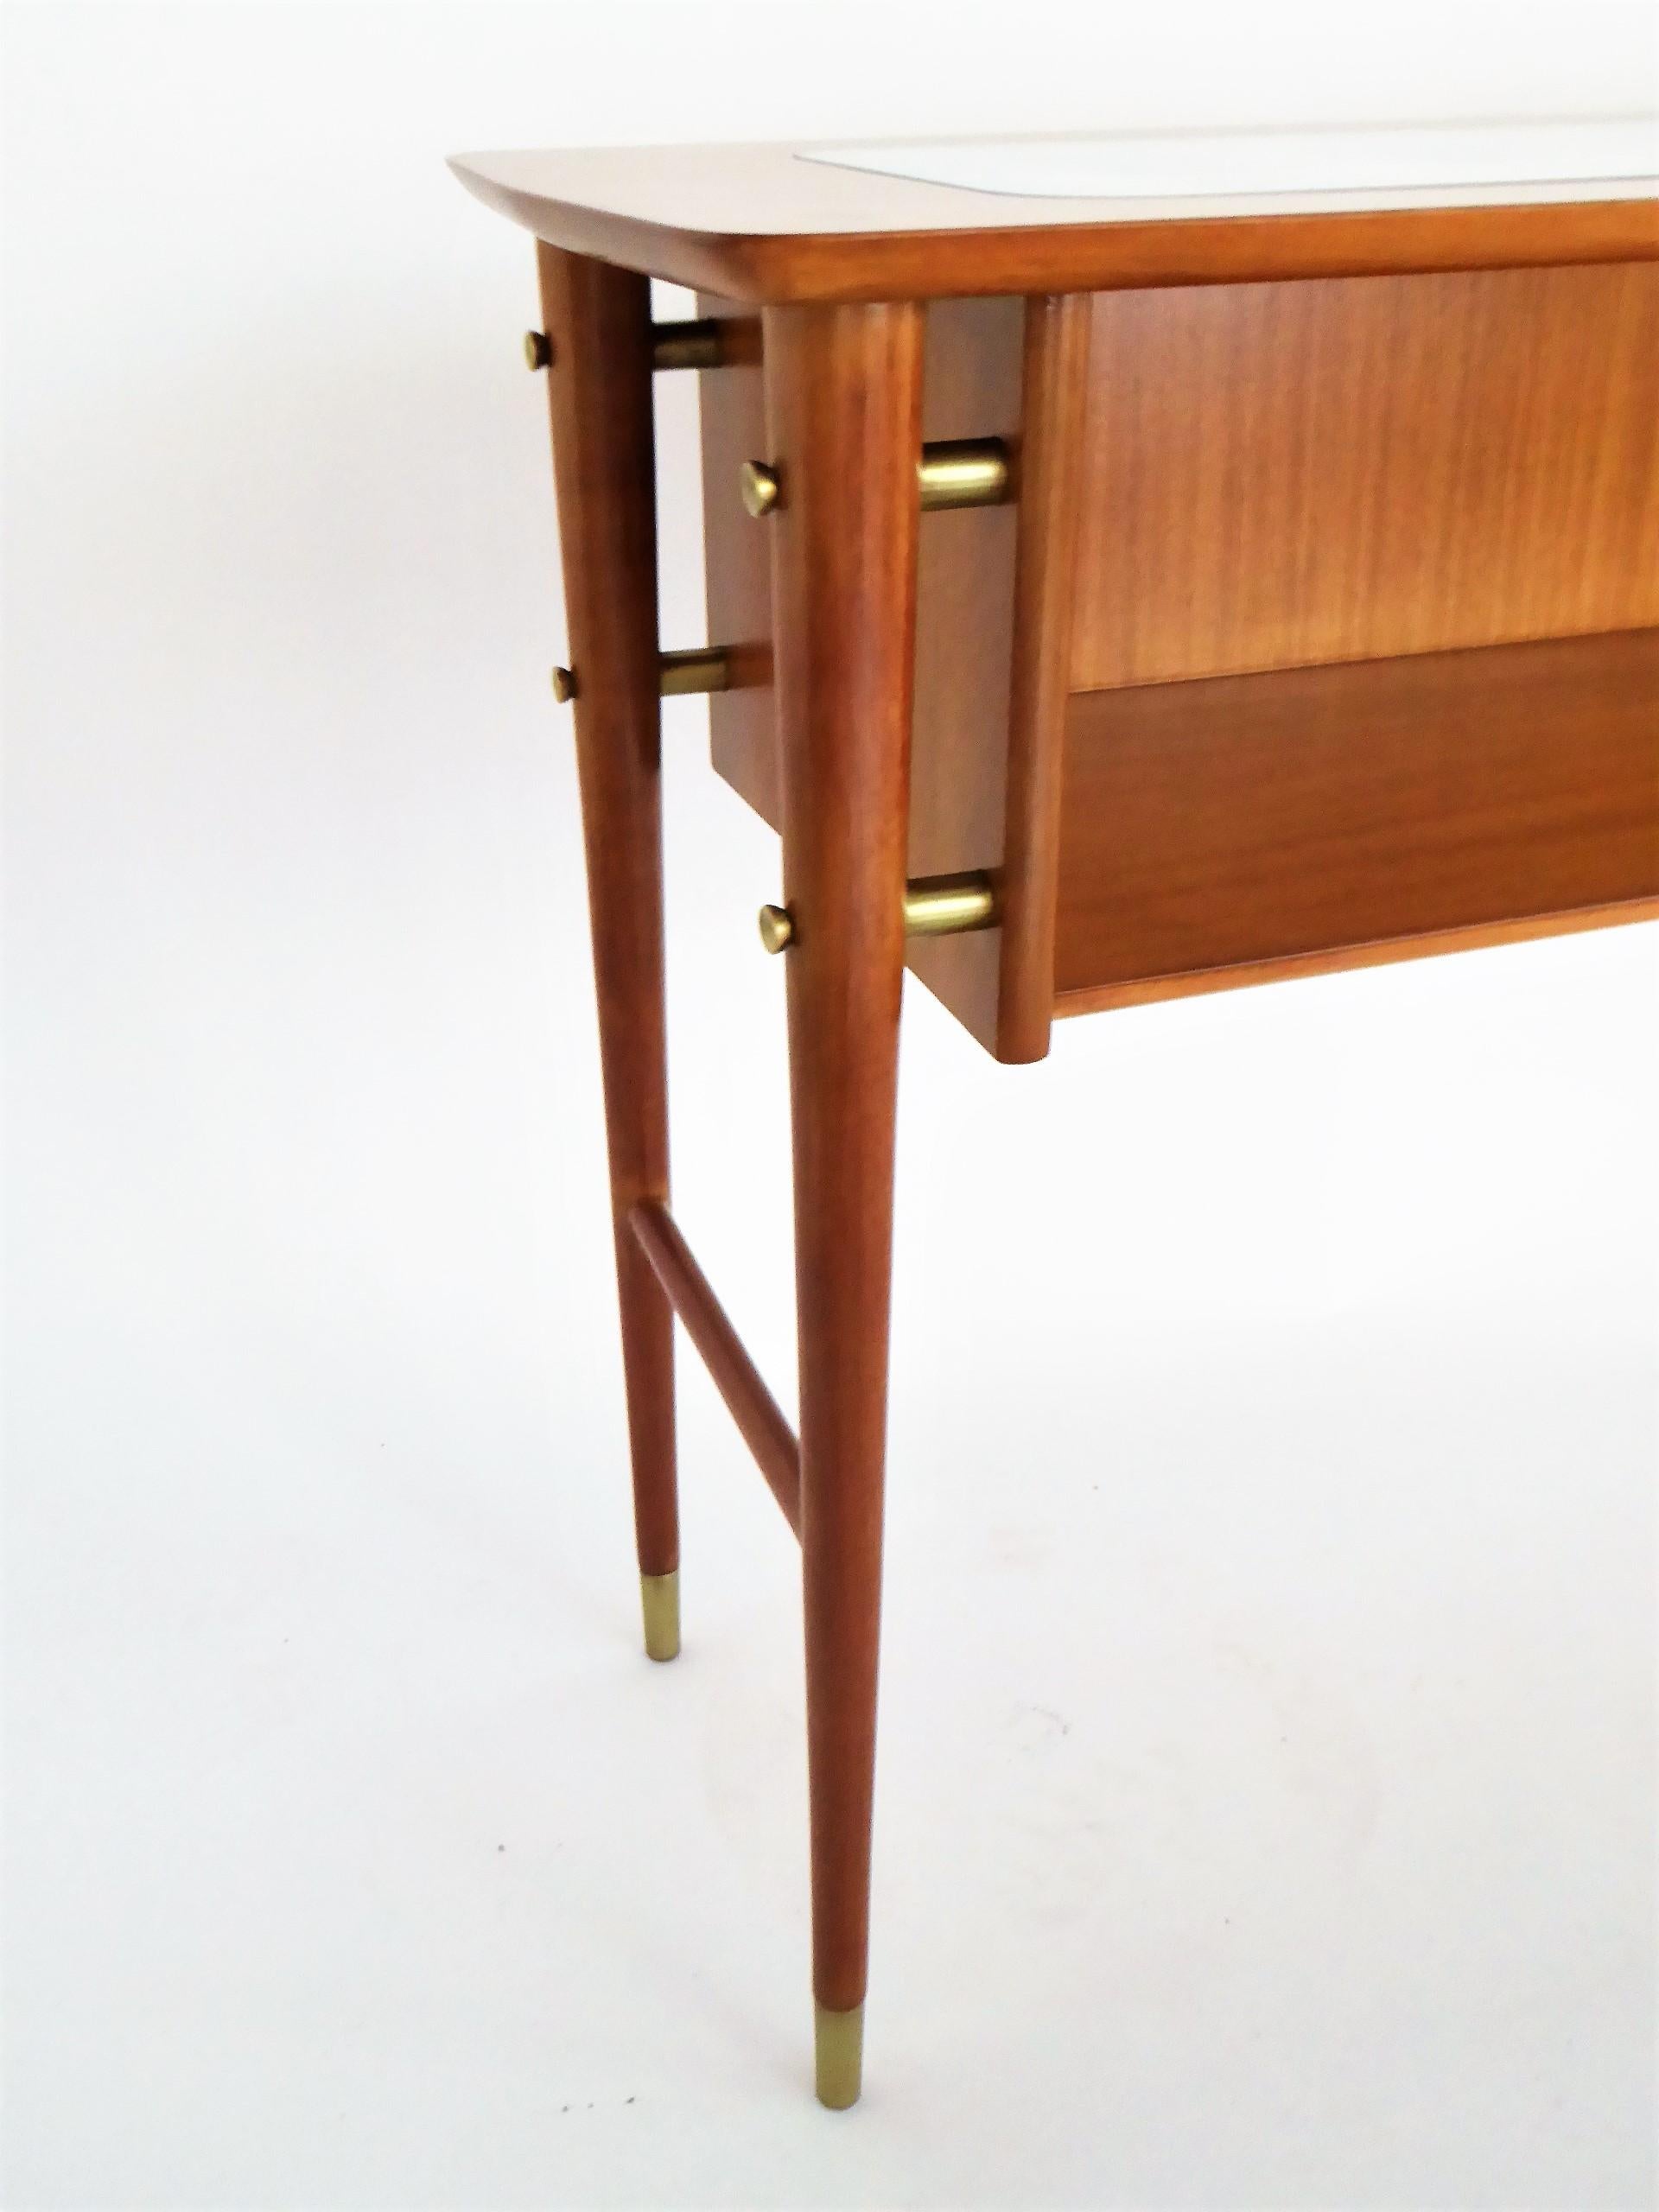 Mid-20th Century 1950s Gio Ponti Style Petite Console Table with Shelf in Blond Mahogany